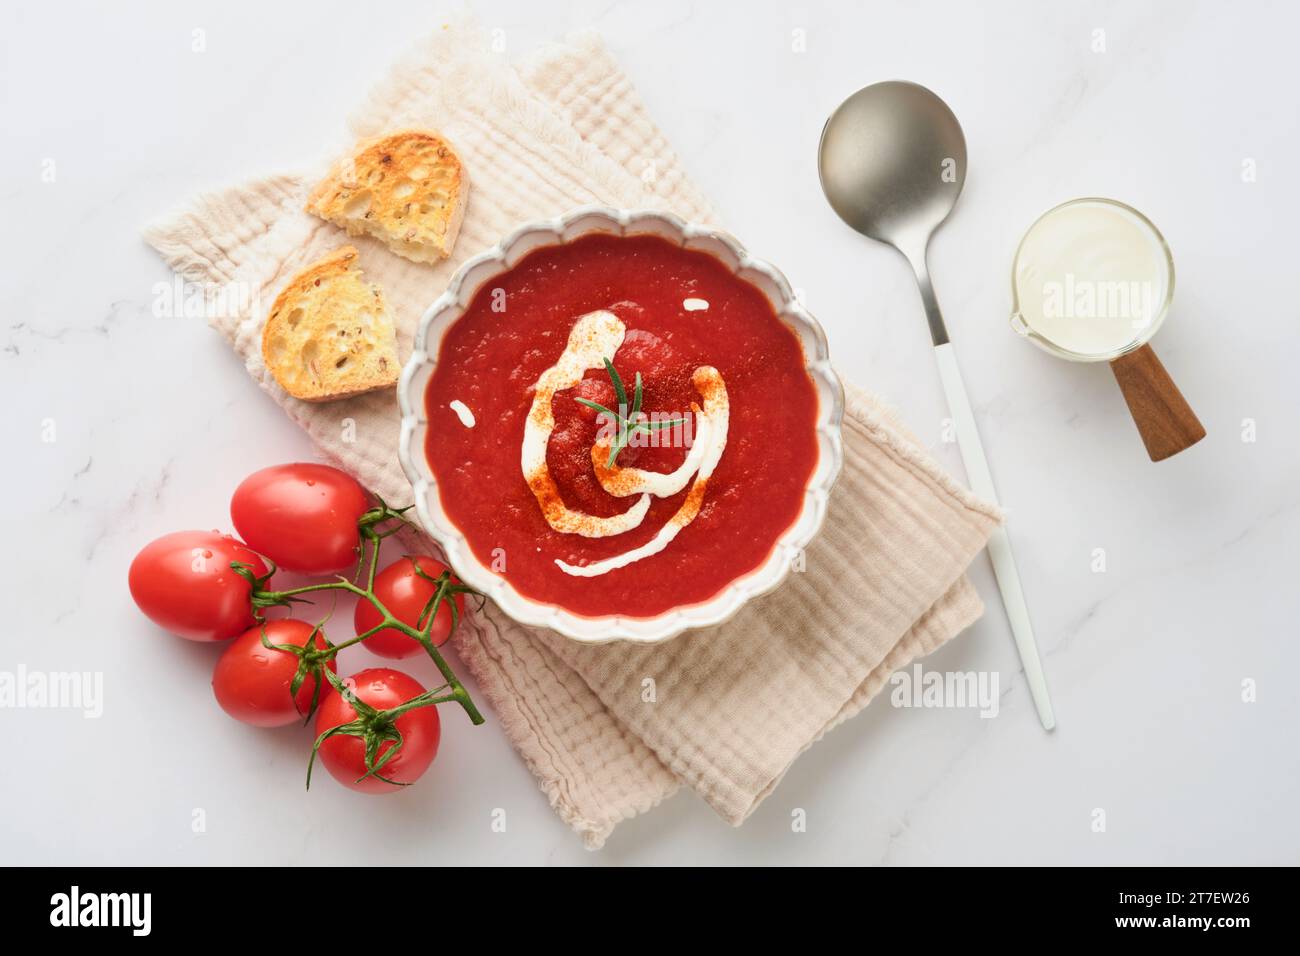 Soup. Tomato cream soup or gazpacho with herbs, seasonings, cherry tomato and parsley in white bowl on light grey stone background. Healthy vegetable Stock Photo